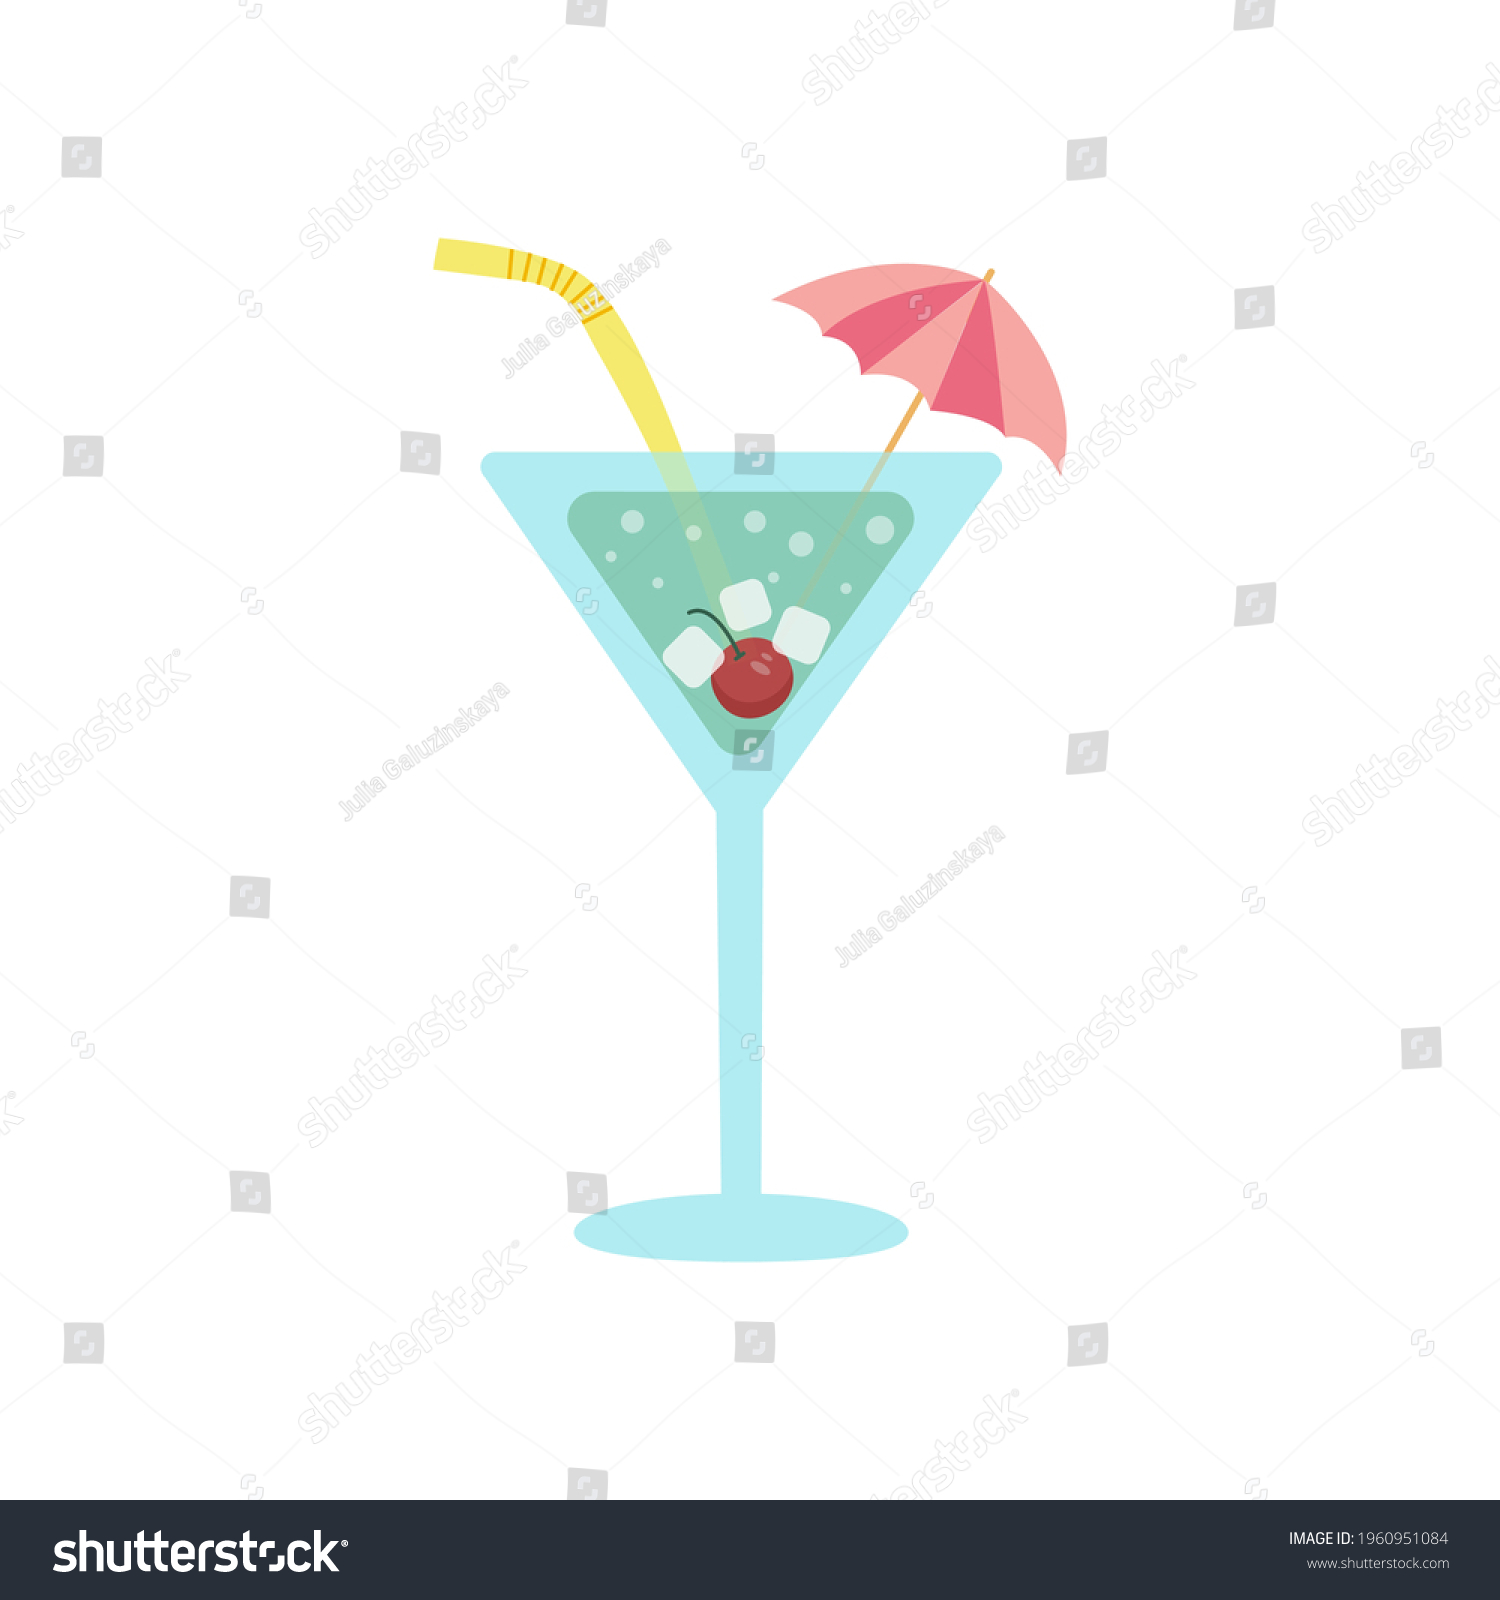 SVG of Cocktail icon or sign. Martini glass with cherry, cocktail umbrella and drinking straw. Isolated Flat Cartoon Illustration.  svg